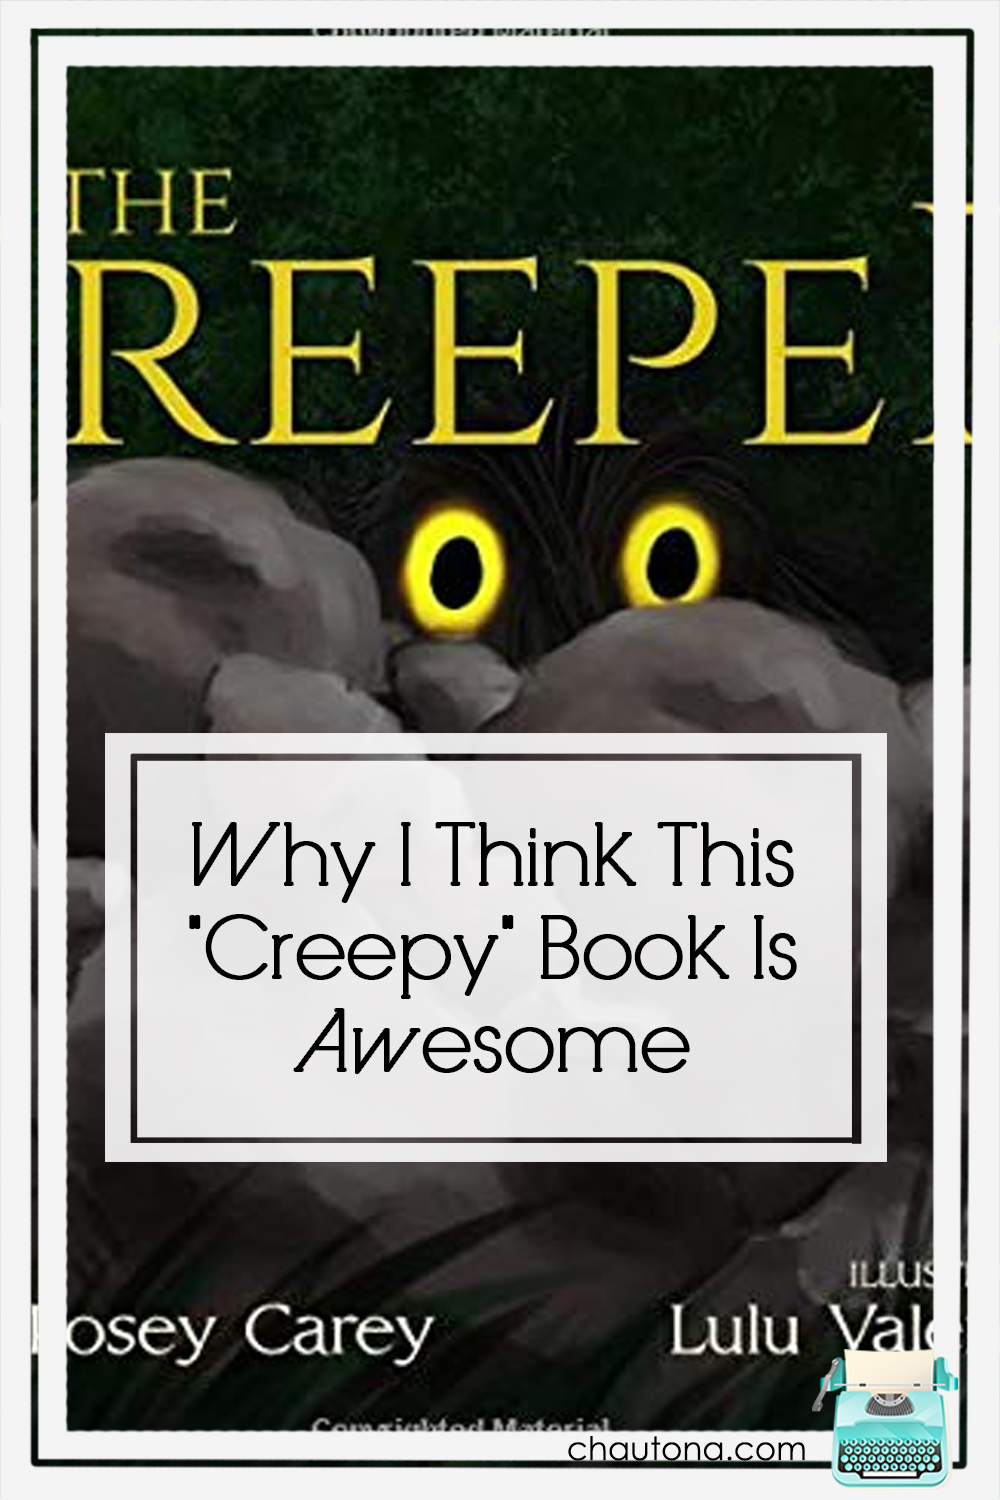 Why I think this "creepy" book is awesome- the creeper